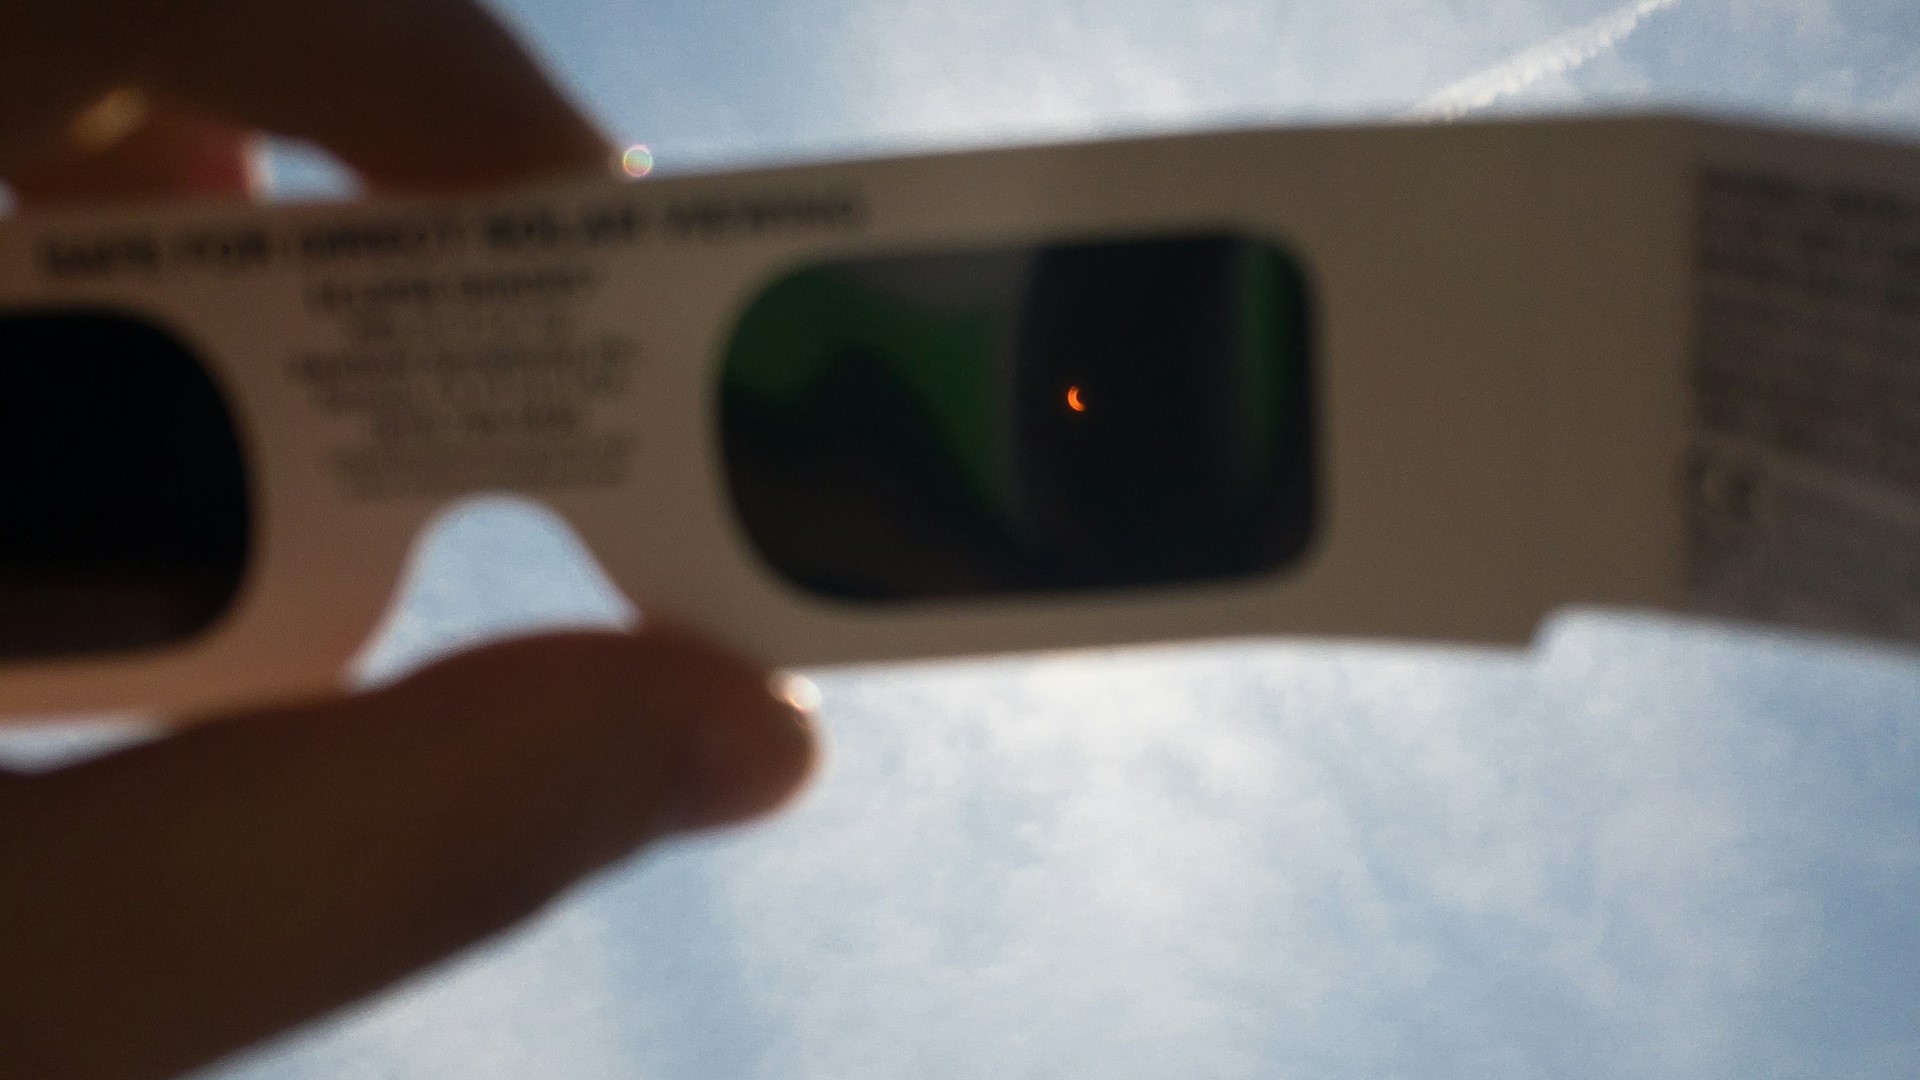 Holding eclipse glasses up to view the 2017 total solar eclipse